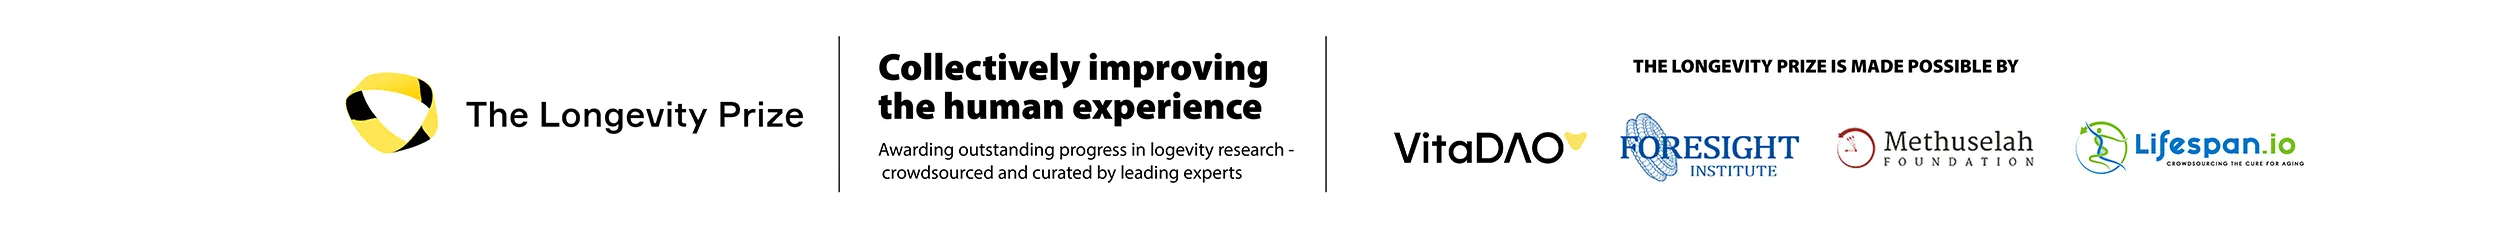 The Longevity Prize encourages progress outside of traditional science grants and systems.